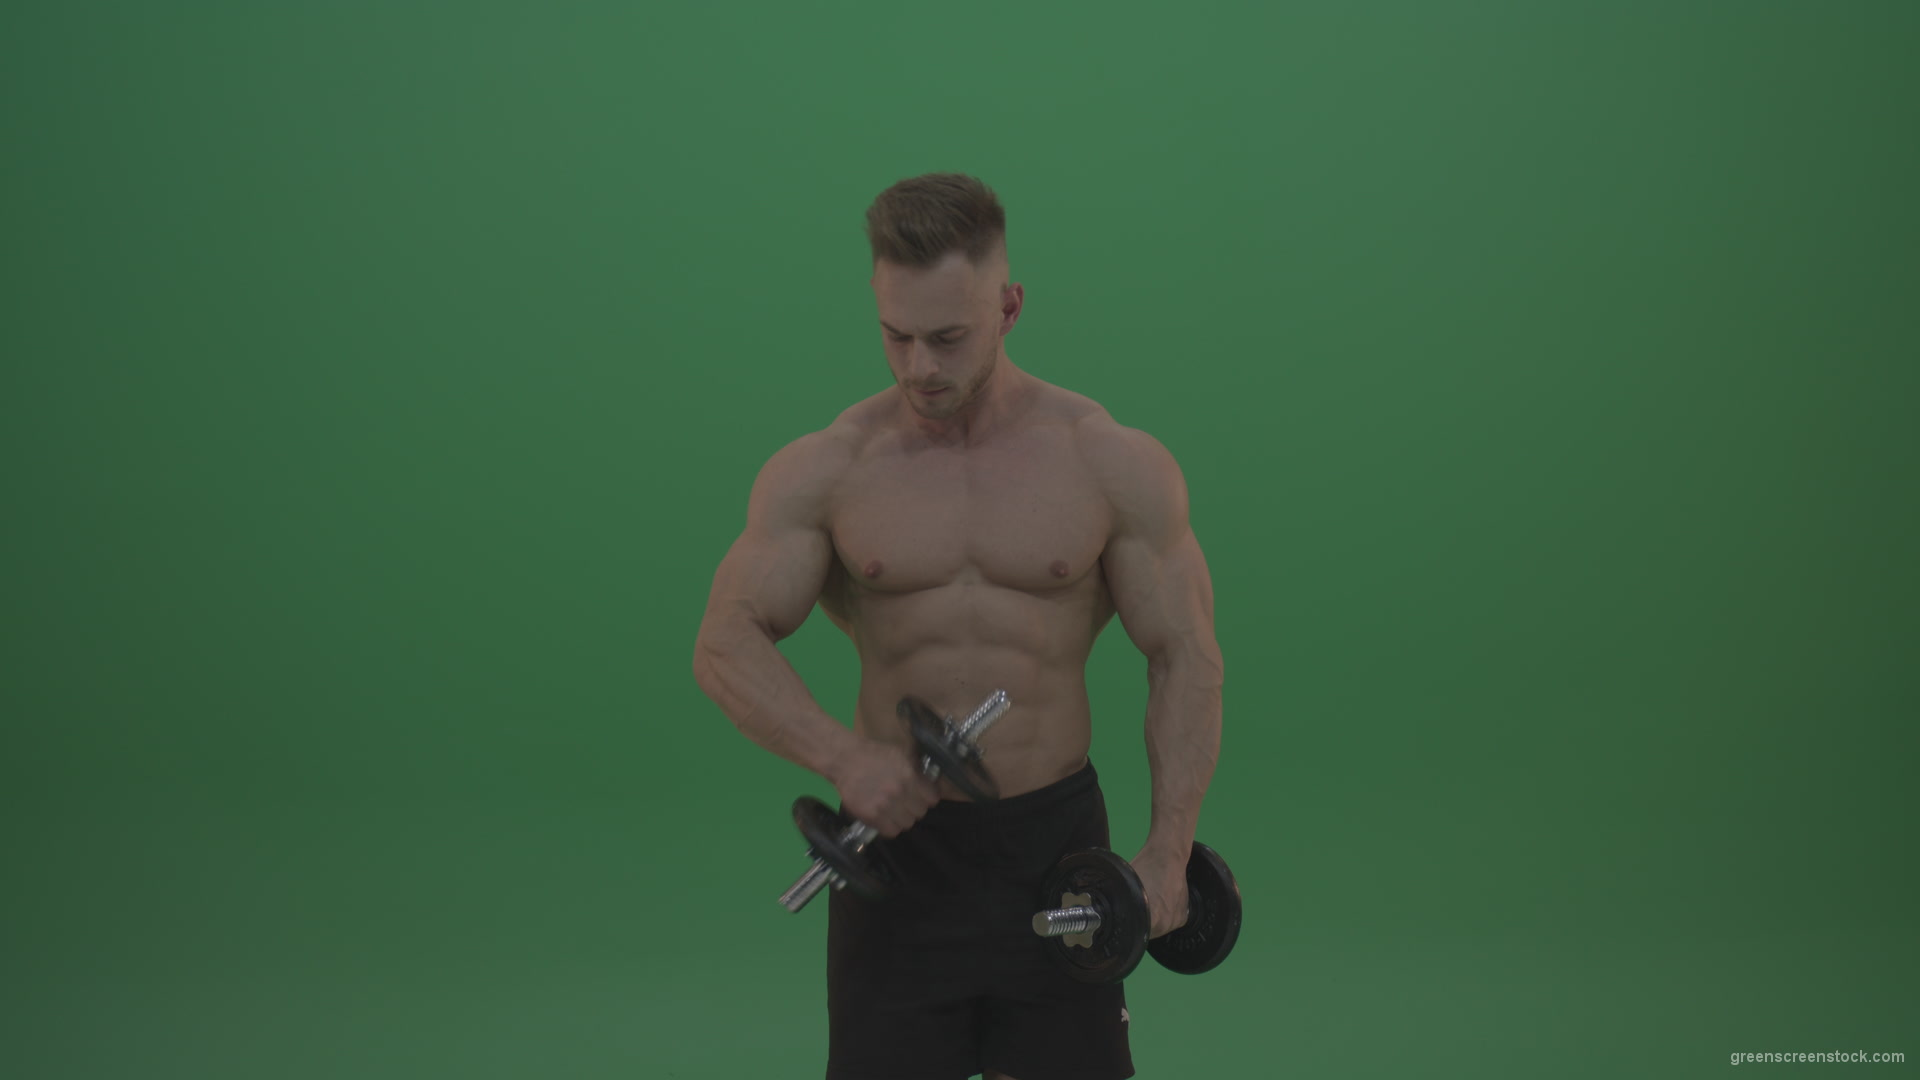 Young_Bodybuilder_Working_Out_With_Two_Handed_Dumbbell_Biceps_Exercises_On_Green_Screen_Wall_Background_005 Green Screen Stock